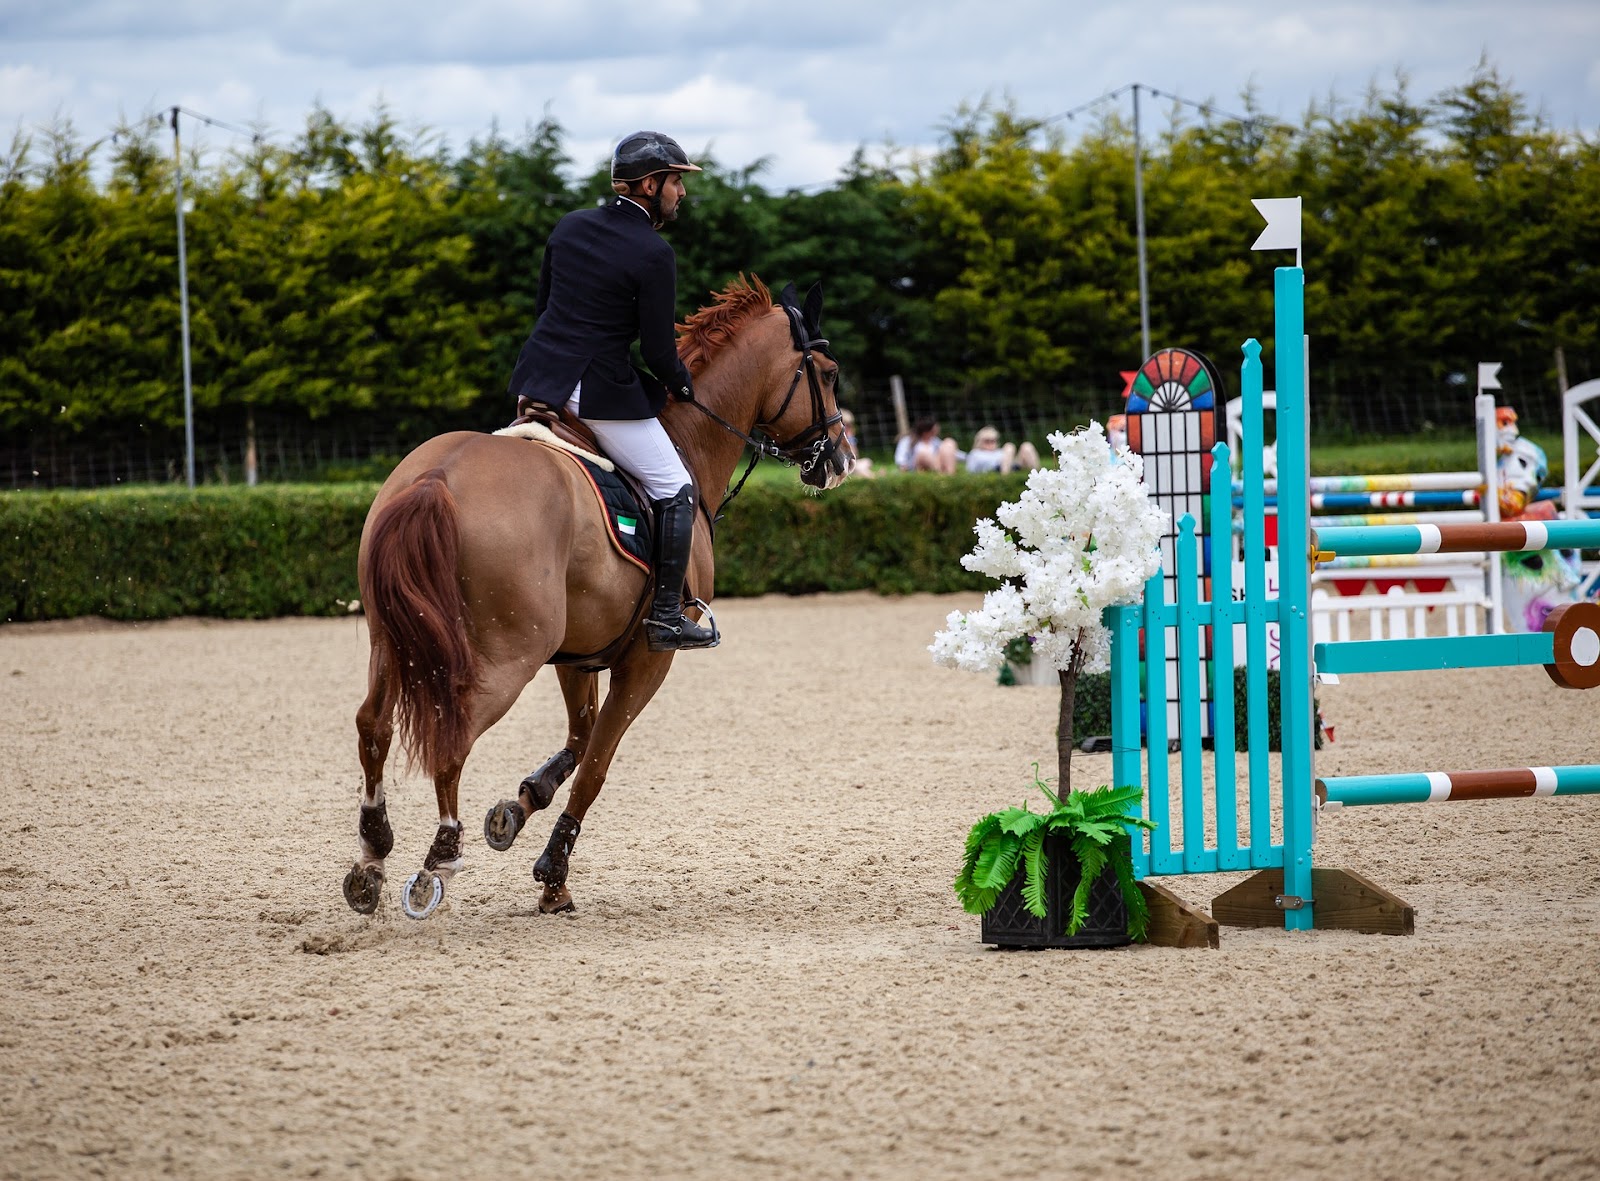 An international show jumper on a chestnut horse looks ahead to the next jump